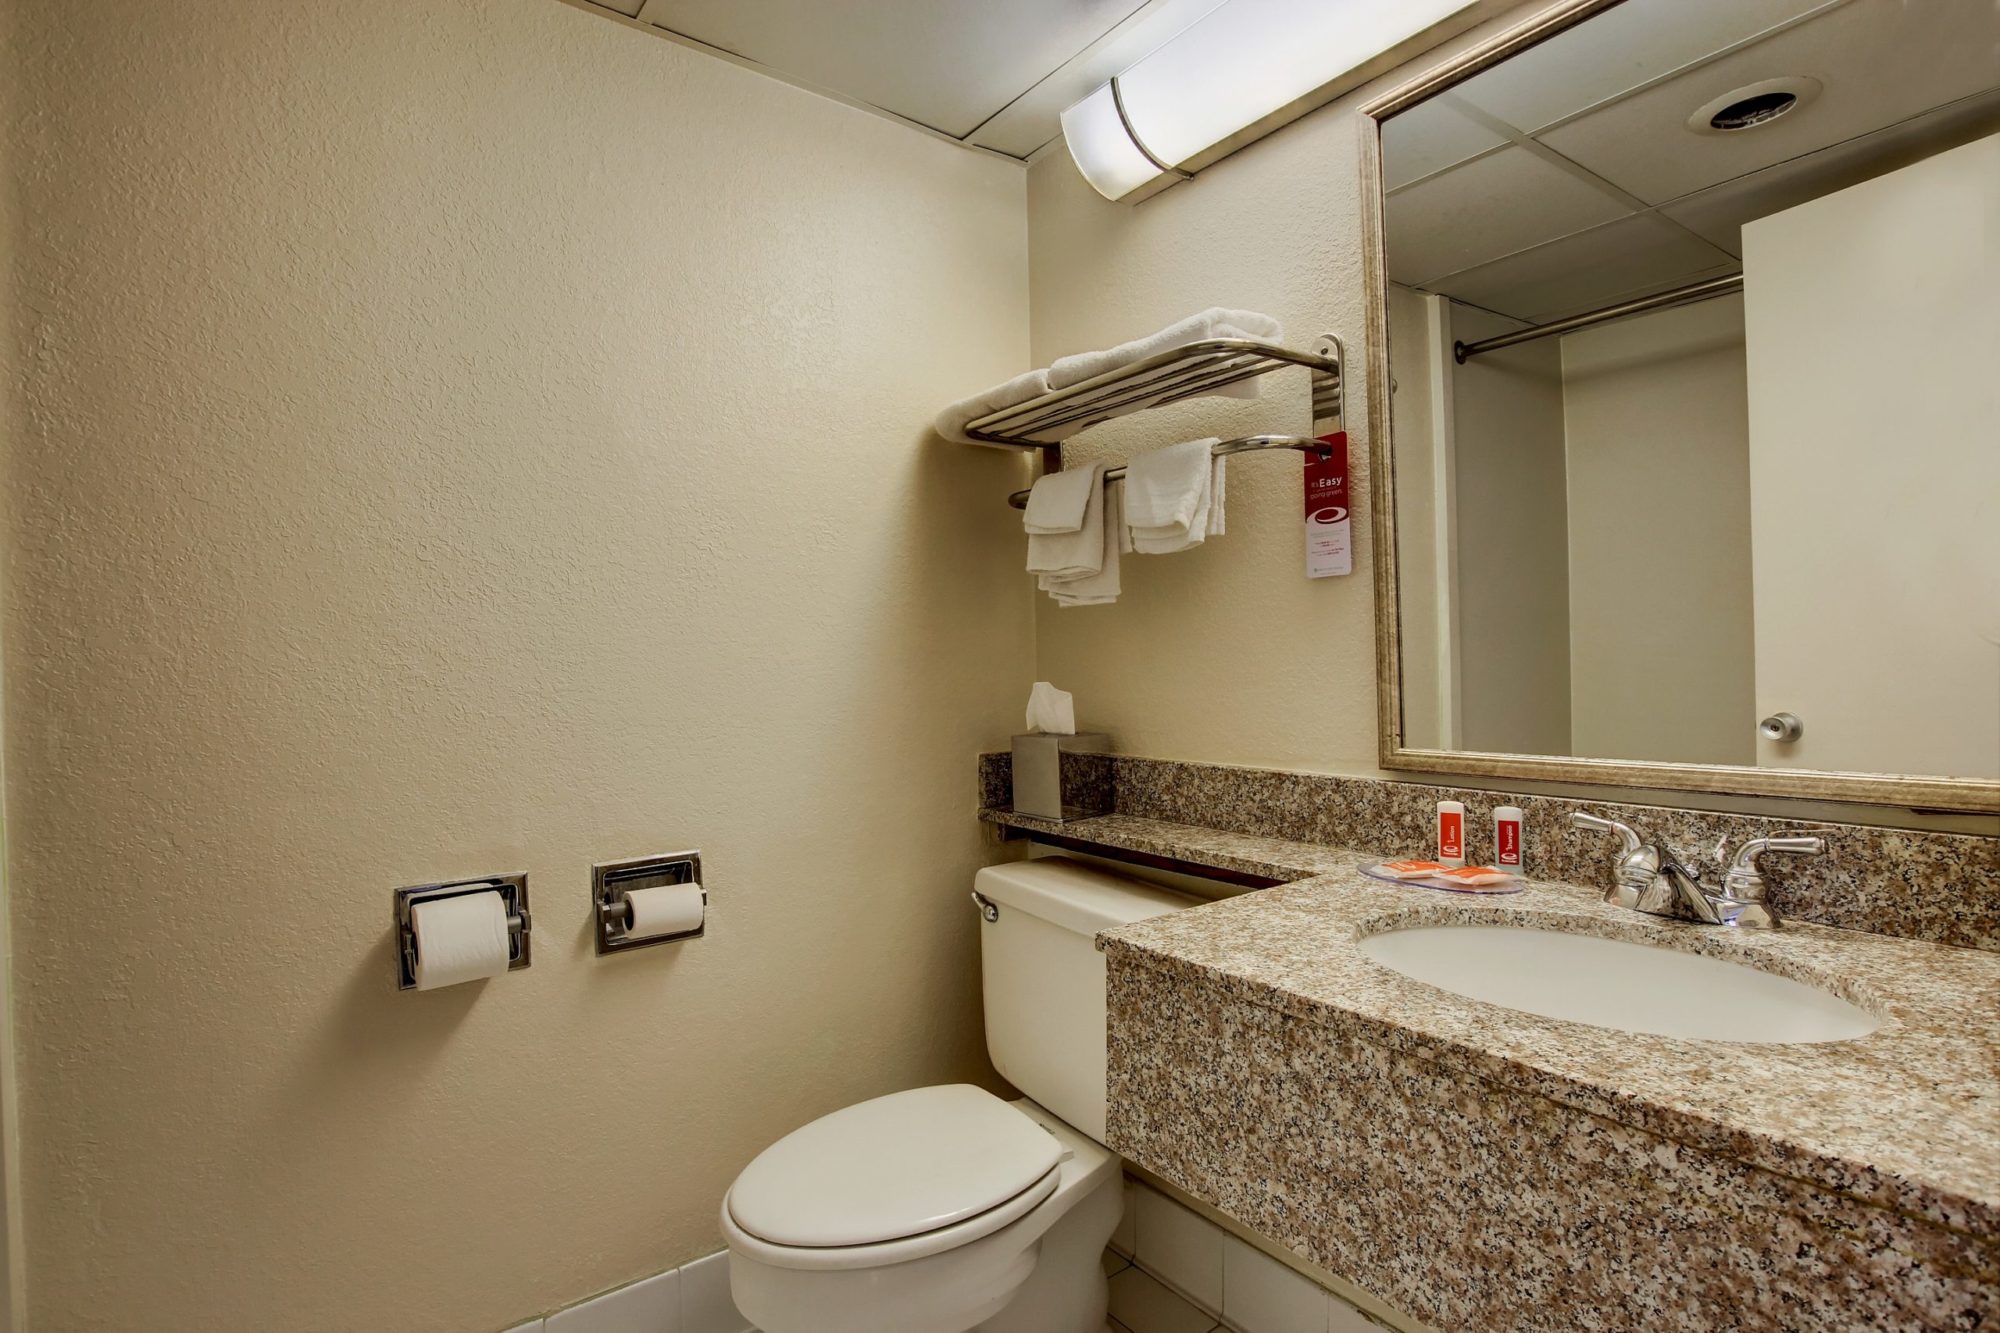 vanity unit with sink, wall mounted towel rail with towels, large wall mounted mirror and toilet